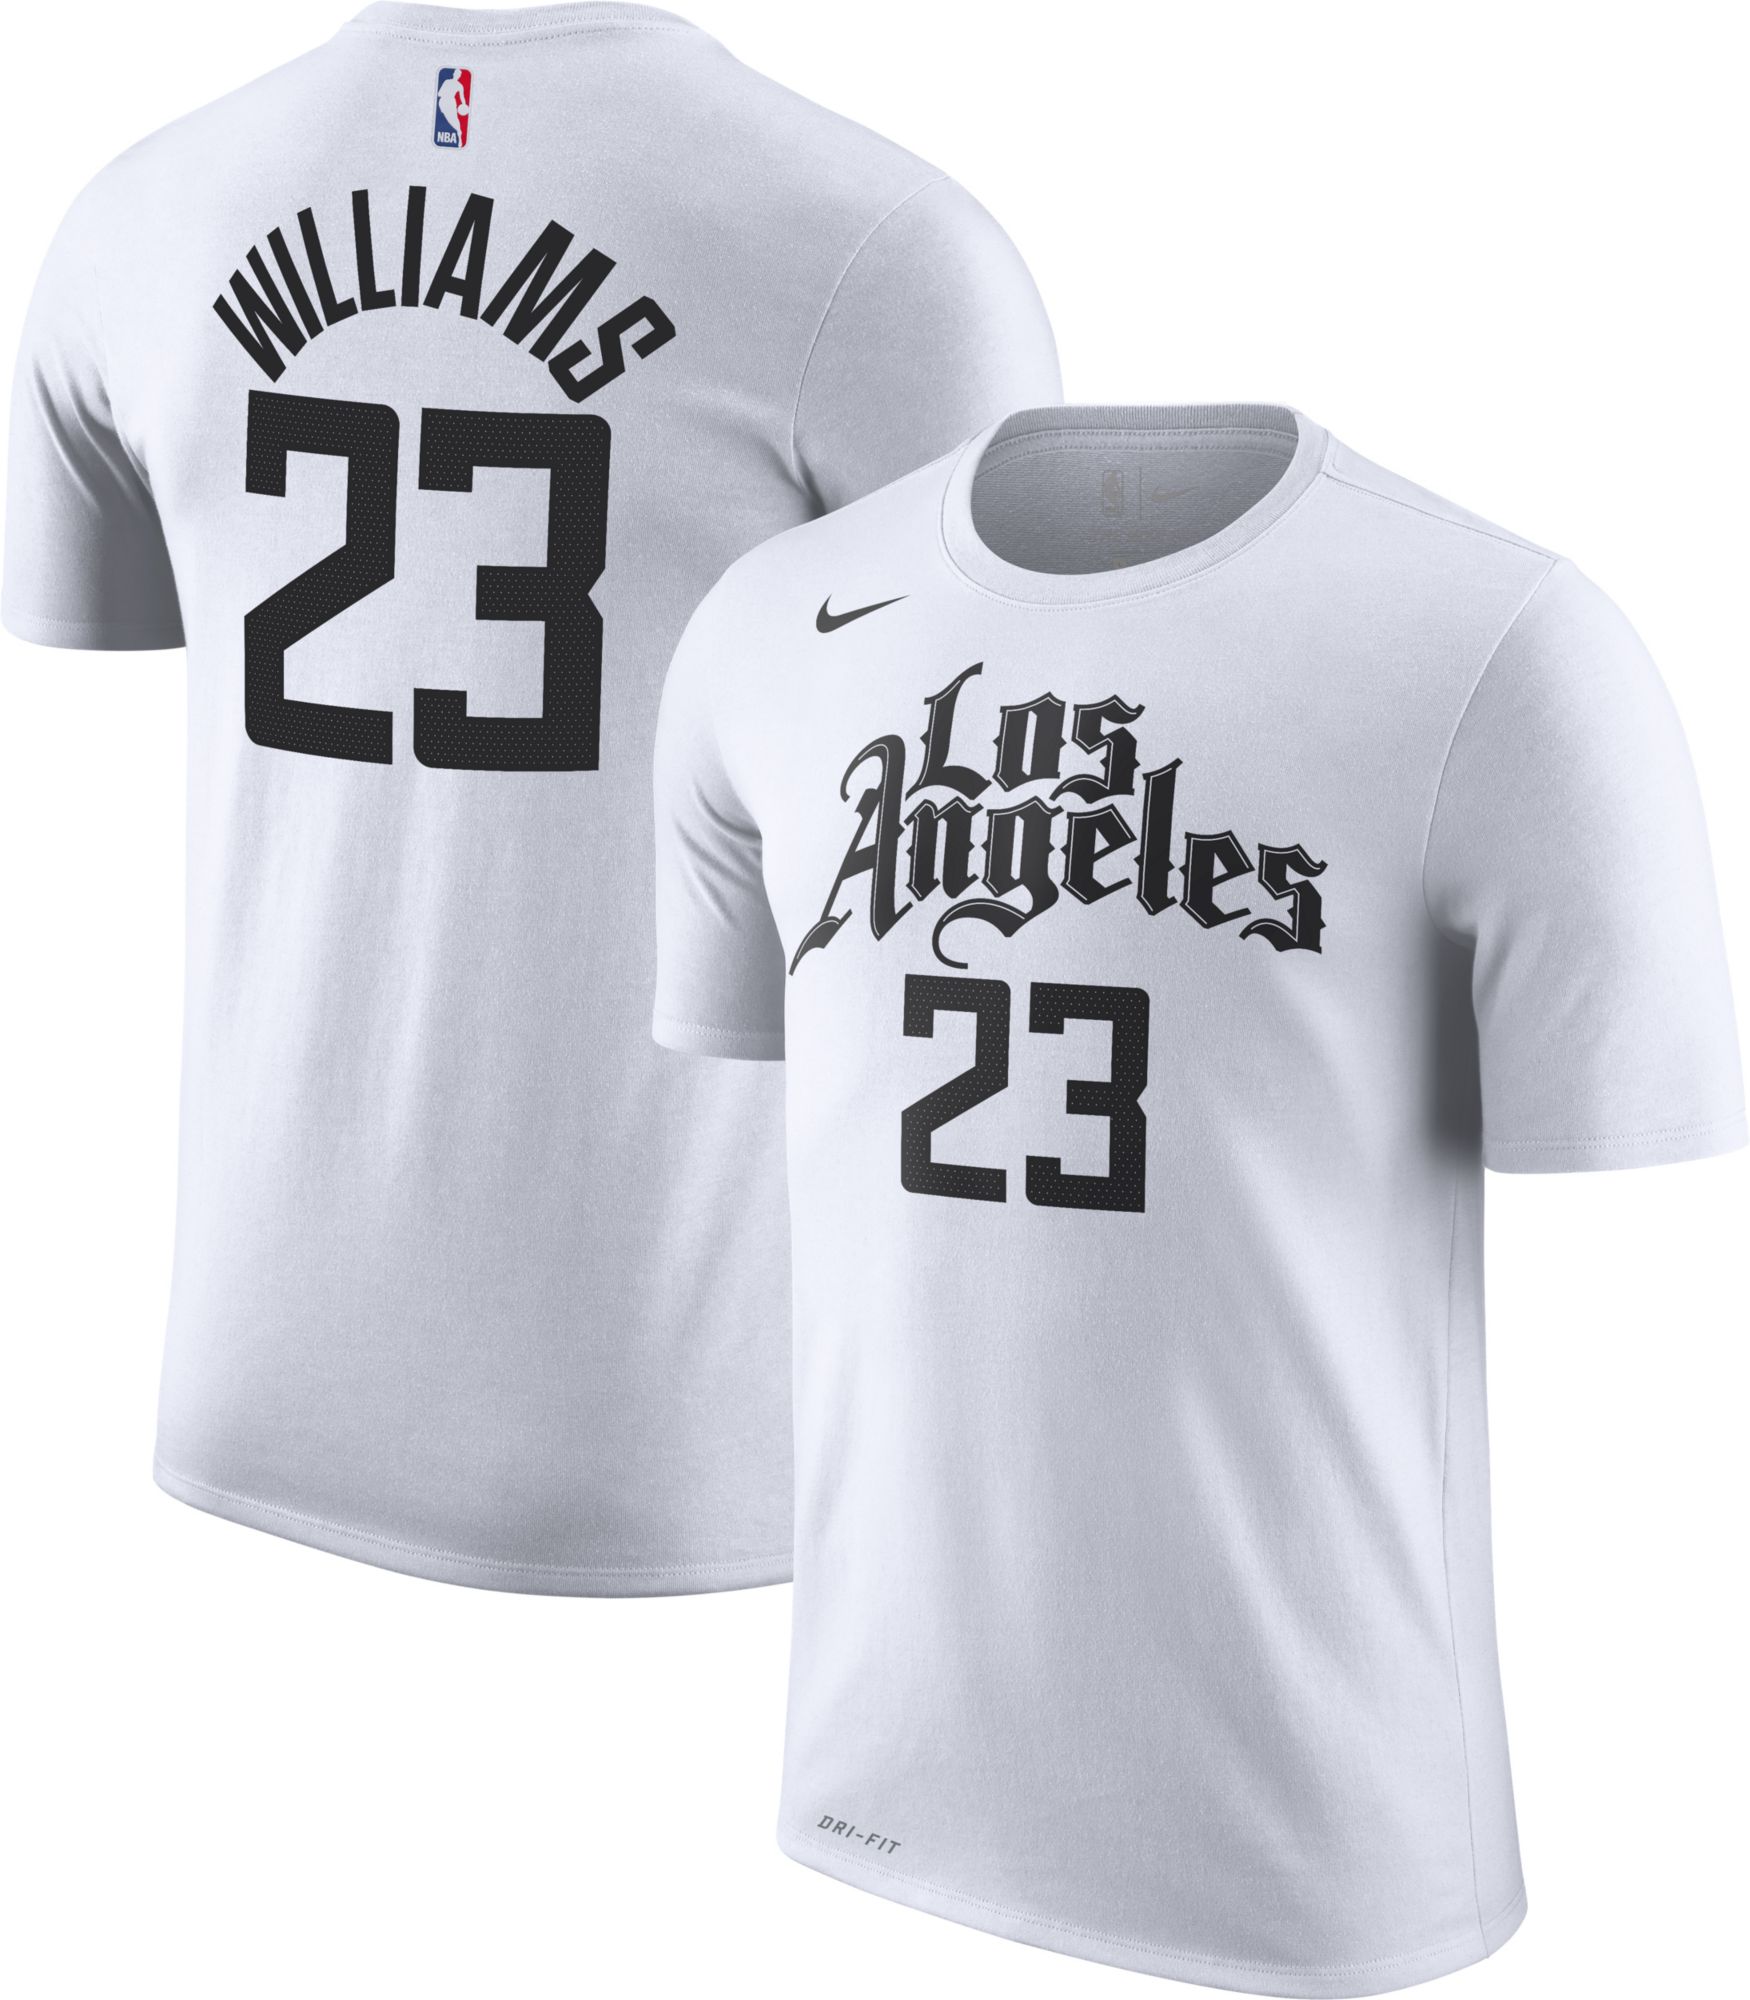 clippers lou williams jersey